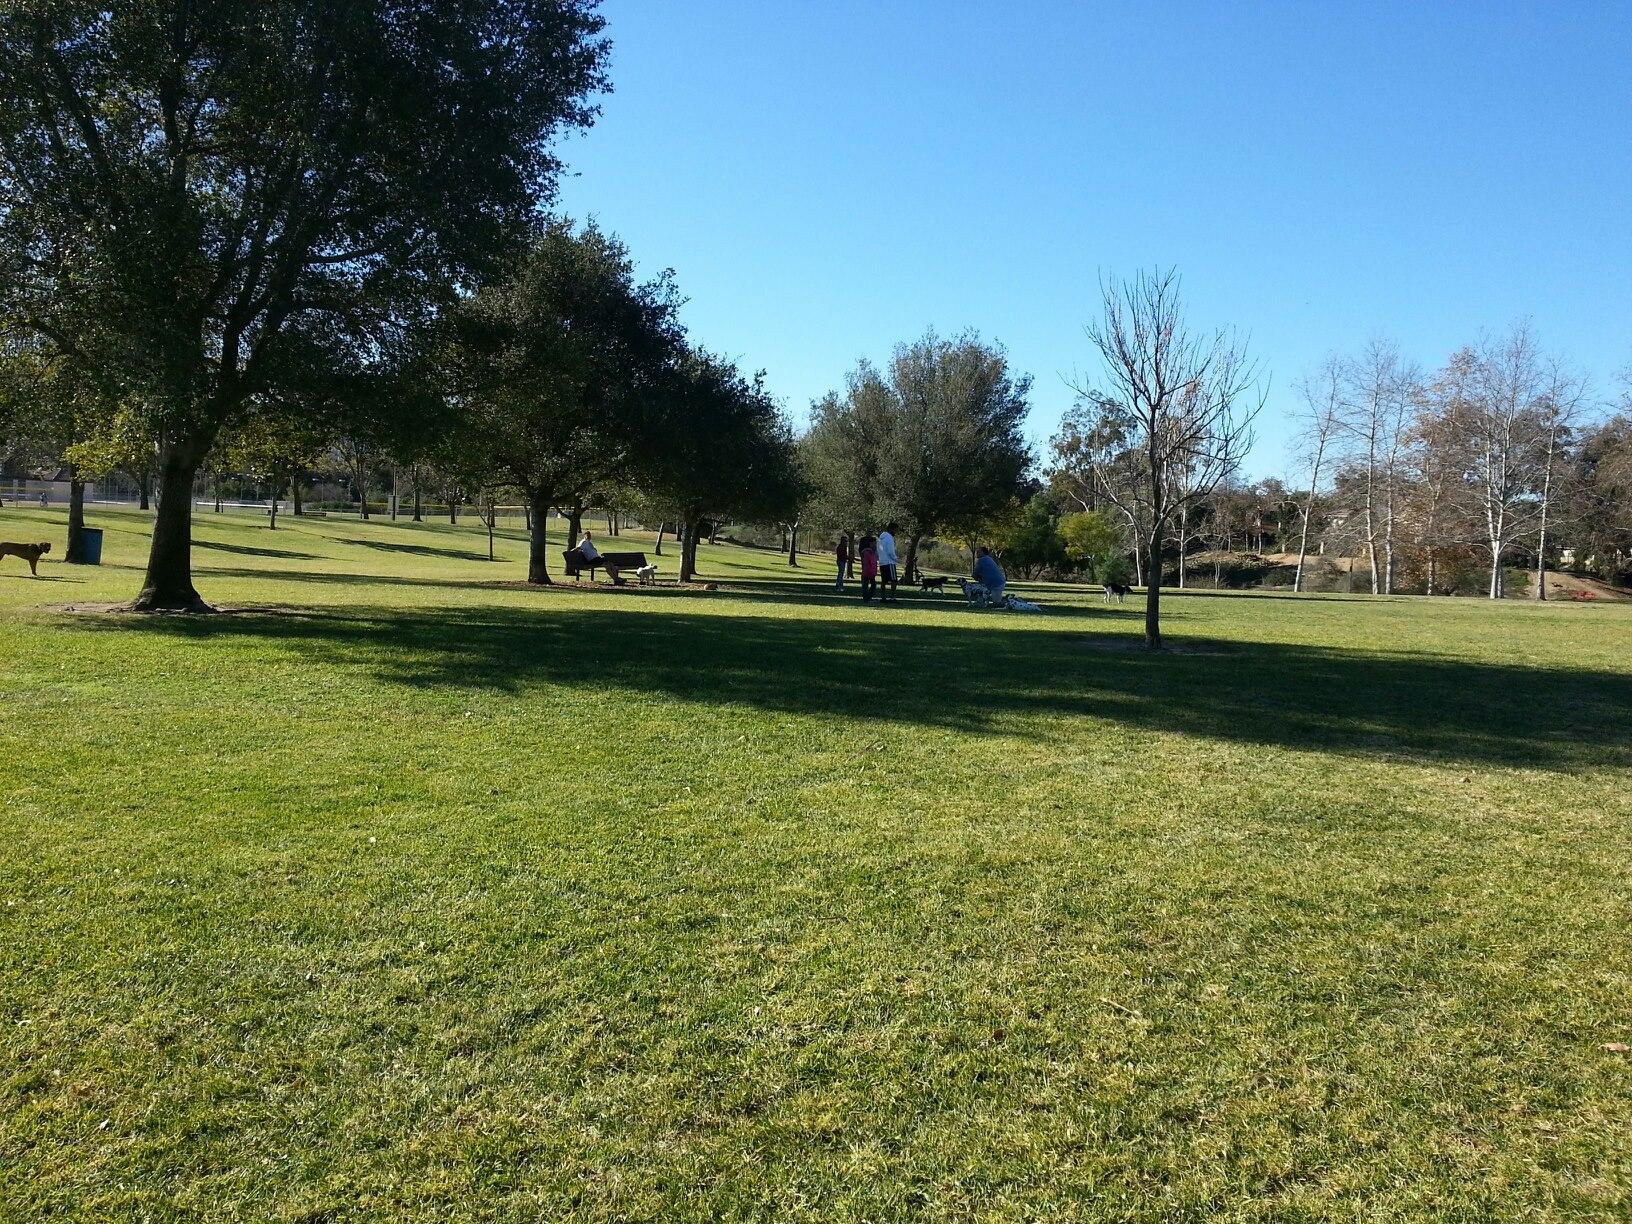 Bark in the Park at Conejo Creek Park North in Thousand Oaks on